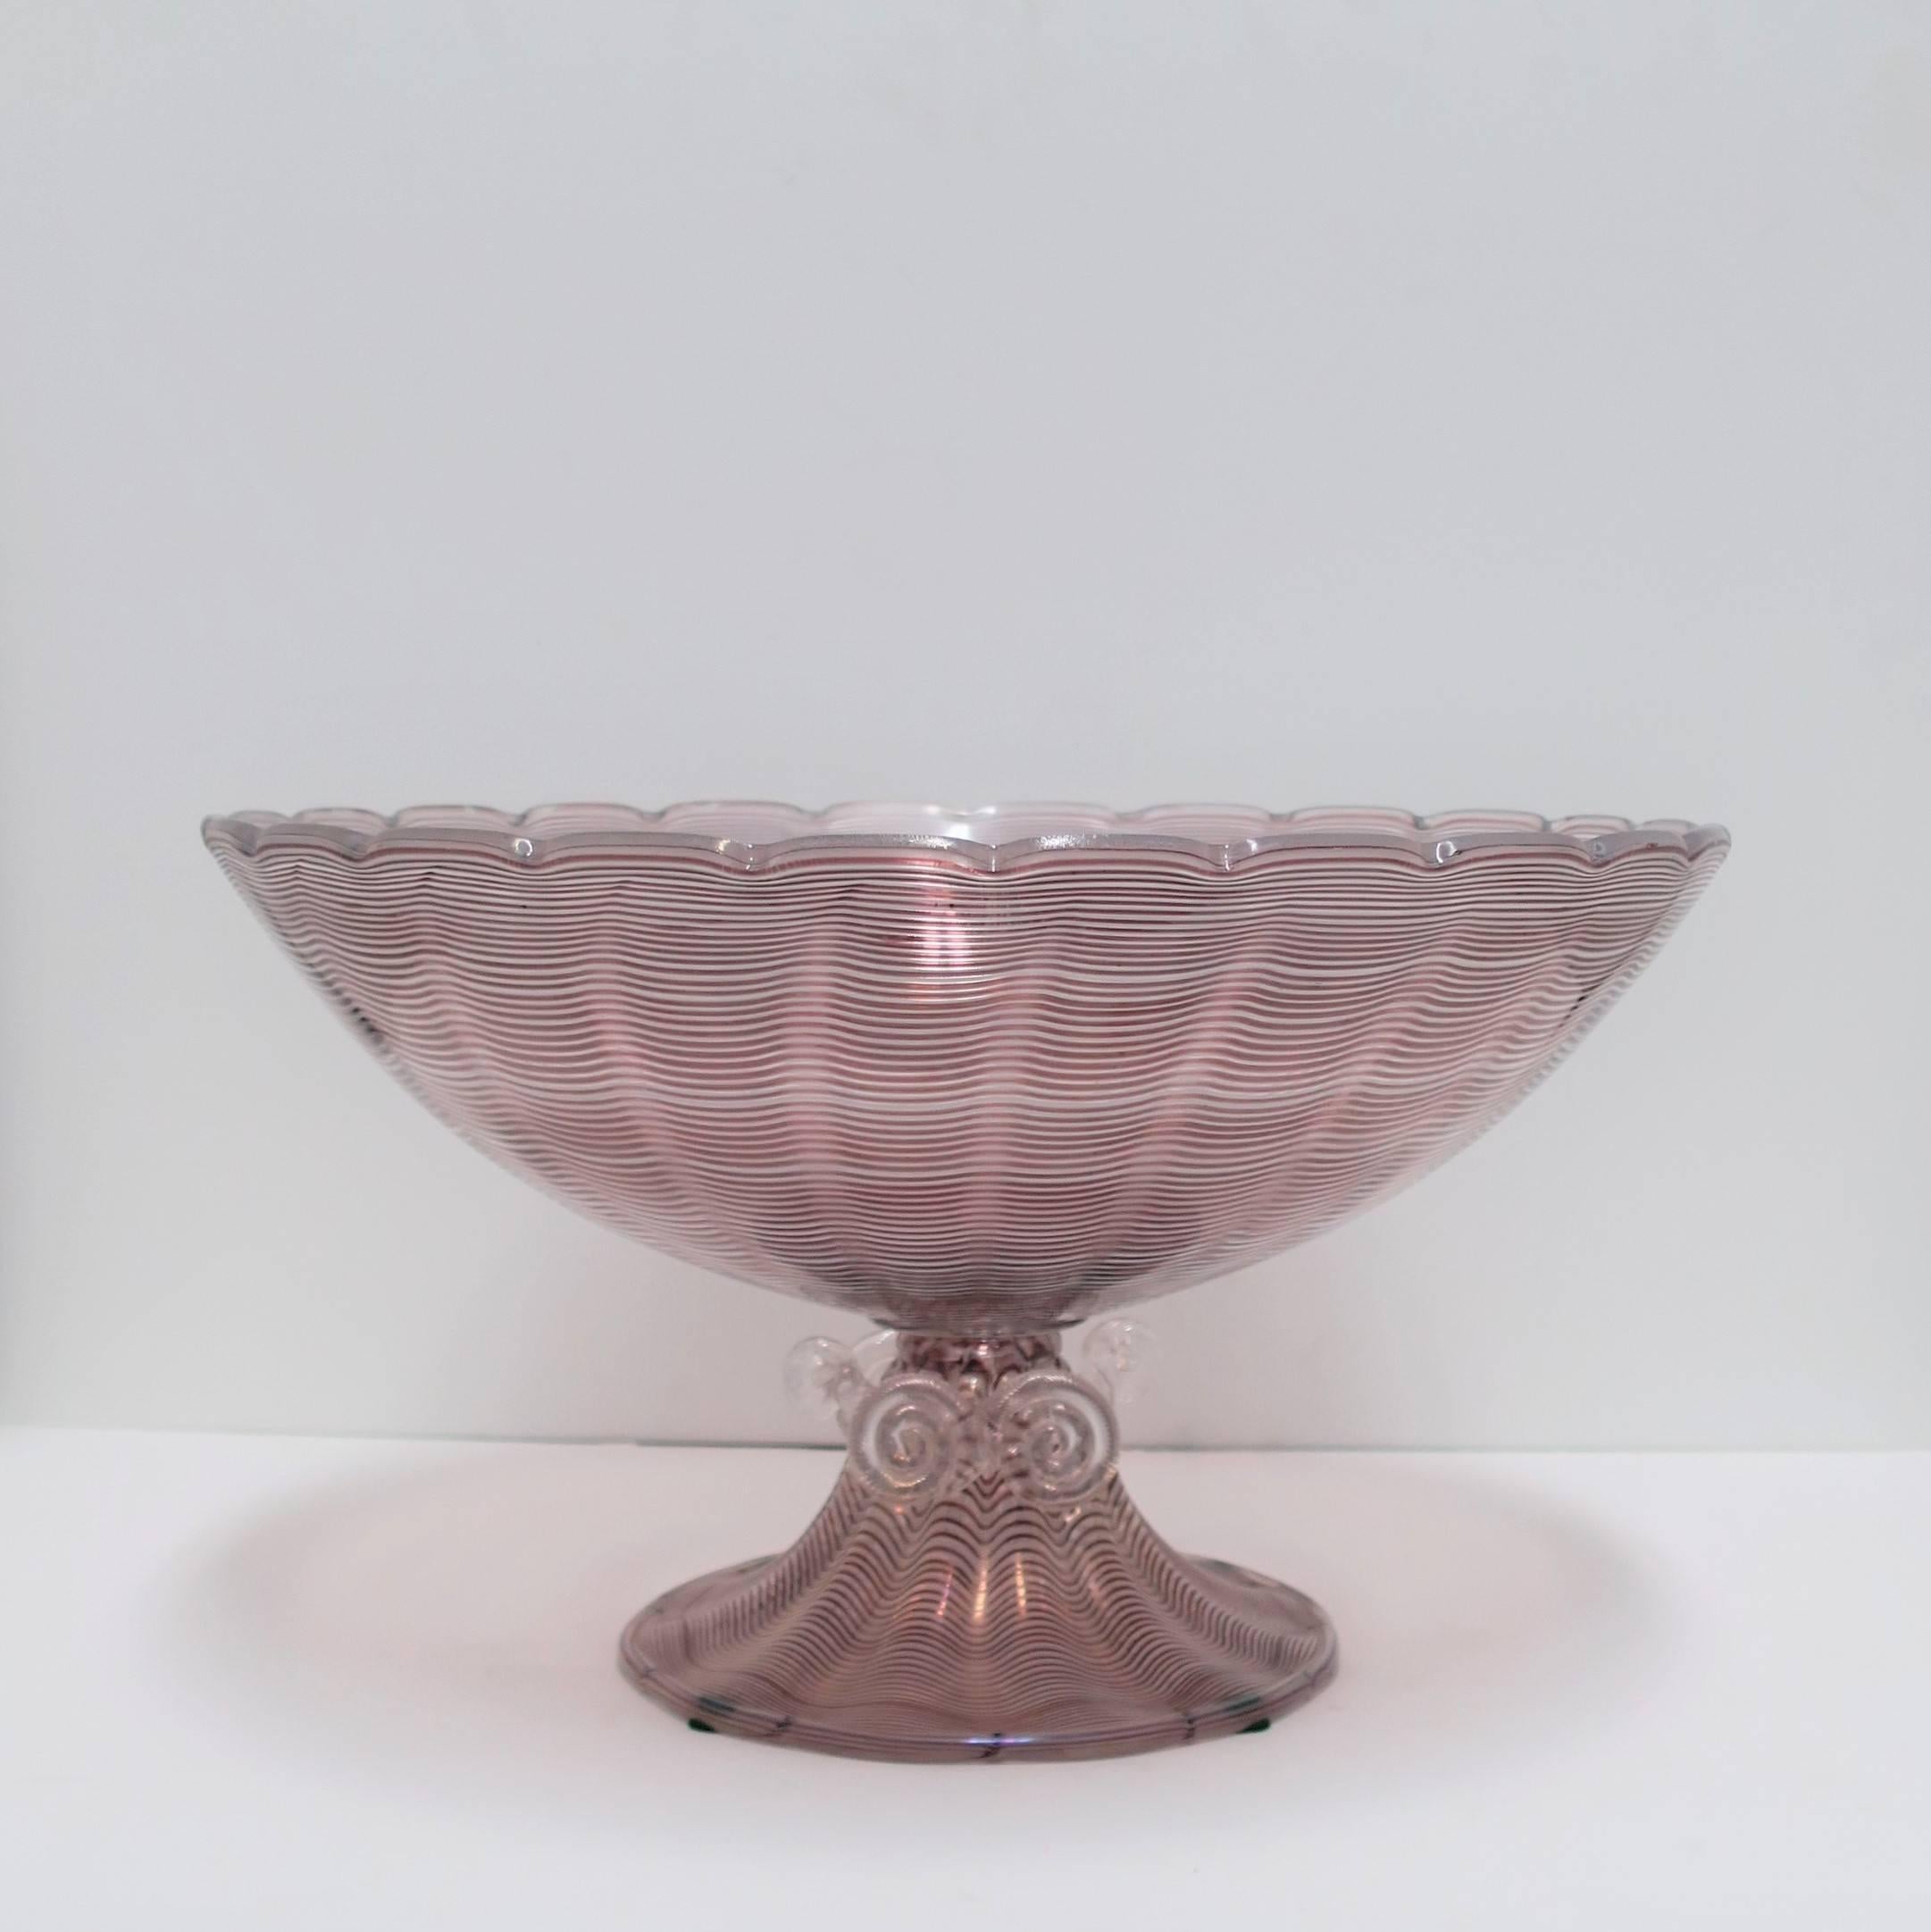 A very beautiful and relatively large vintage Italian Murano art glass urn form centerpiece bowl. Piece has a scalloped edge around top and clear applied art glass swirls on base. Centerpiece hues are purple/amethyst or plum and white-clear